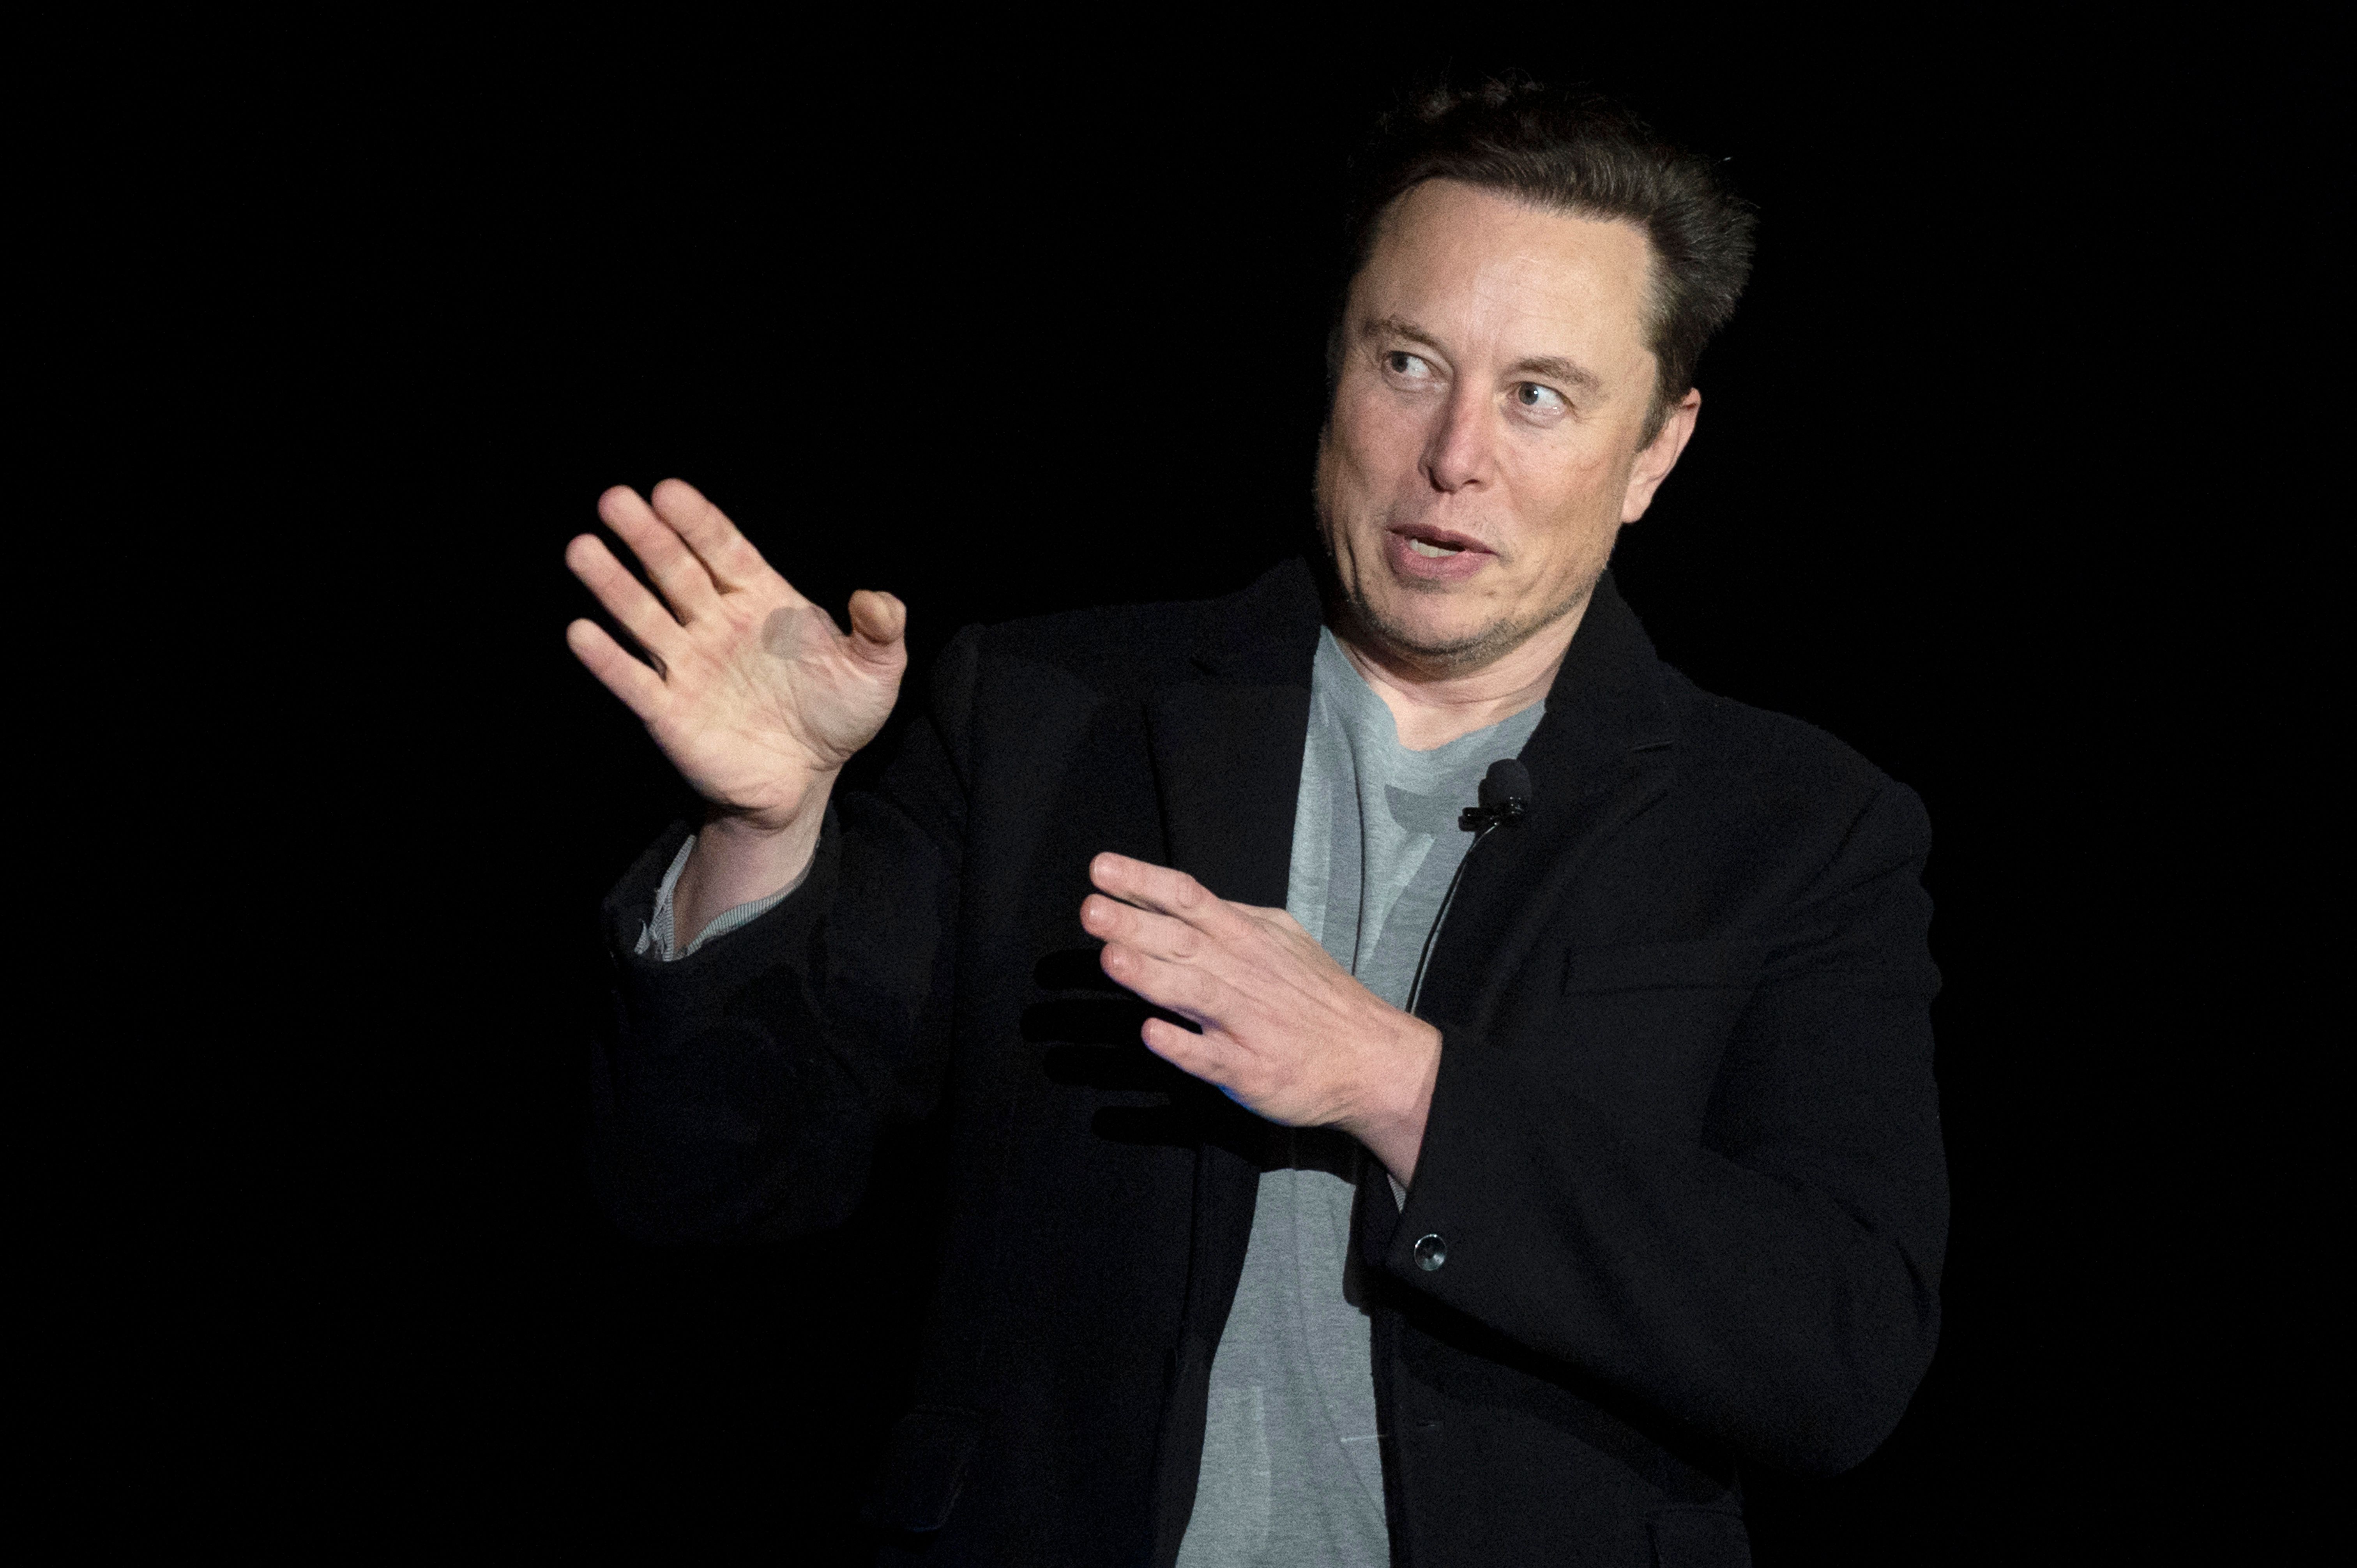 Elon Musk gestures as he speaks during a press conference at SpaceX's Starbase facility near Boca Chica Village in South Texas on February 10, 2022. - Billionaire entrepreneur Elon Musk delivered an eagerly-awaited update on SpaceX's Starship, a prototype rocket the company is developing for crewed interplanetary exploration. (Photo by JIM WATSON / AFP) (Photo by JIM WATSON/AFP via Getty Images)